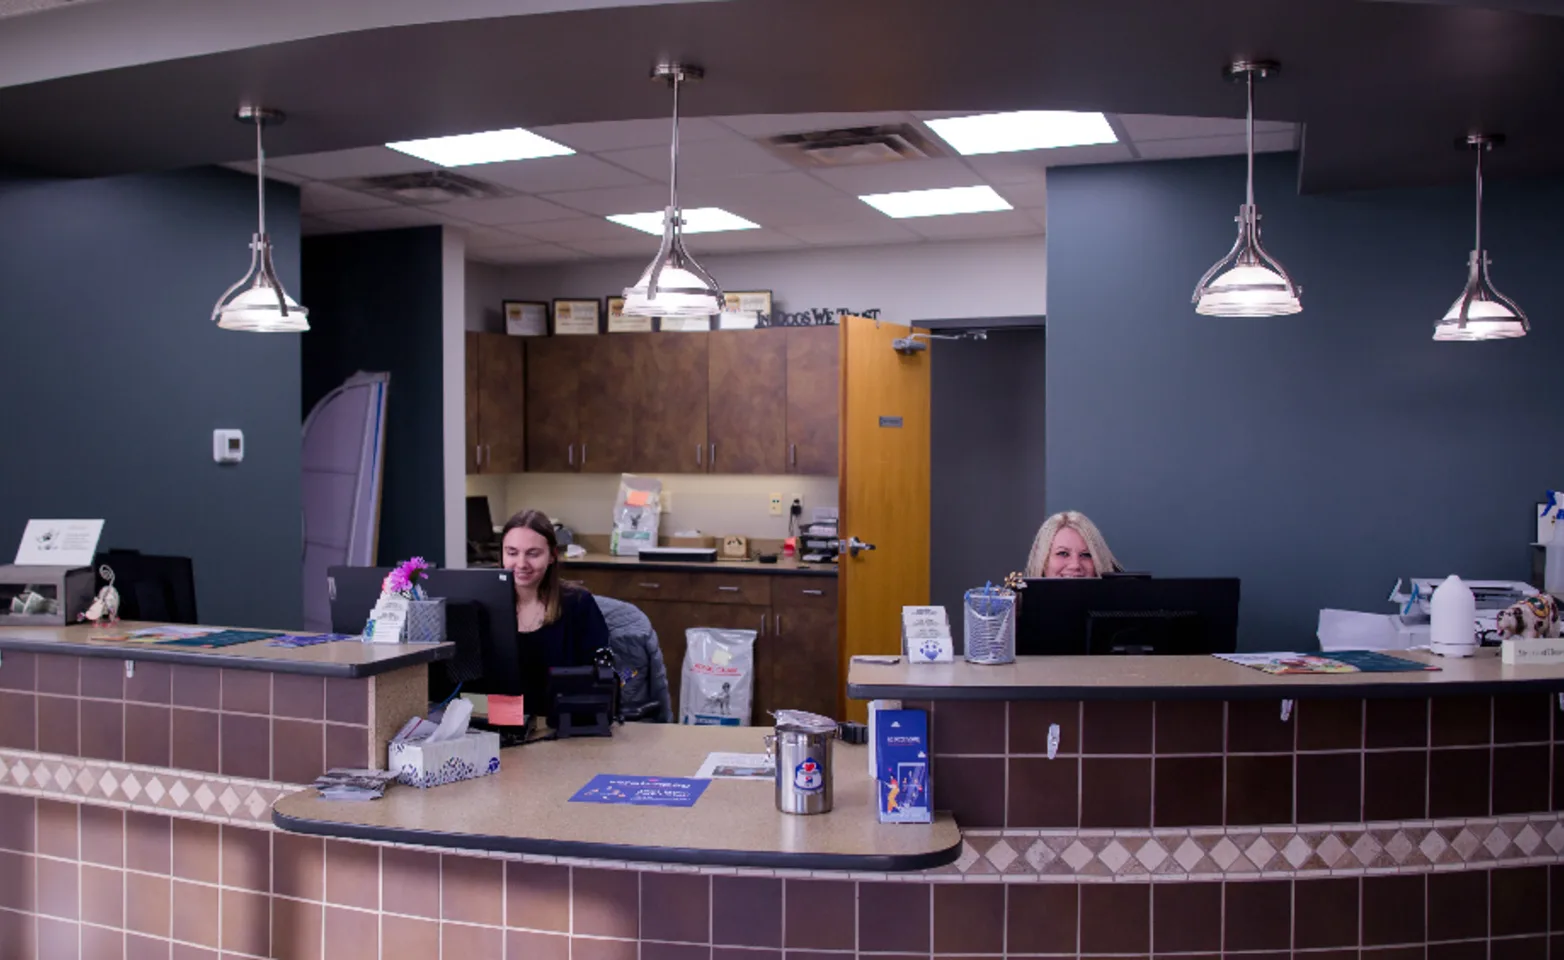 A photo of the front desk at Kindness Animal Hospital